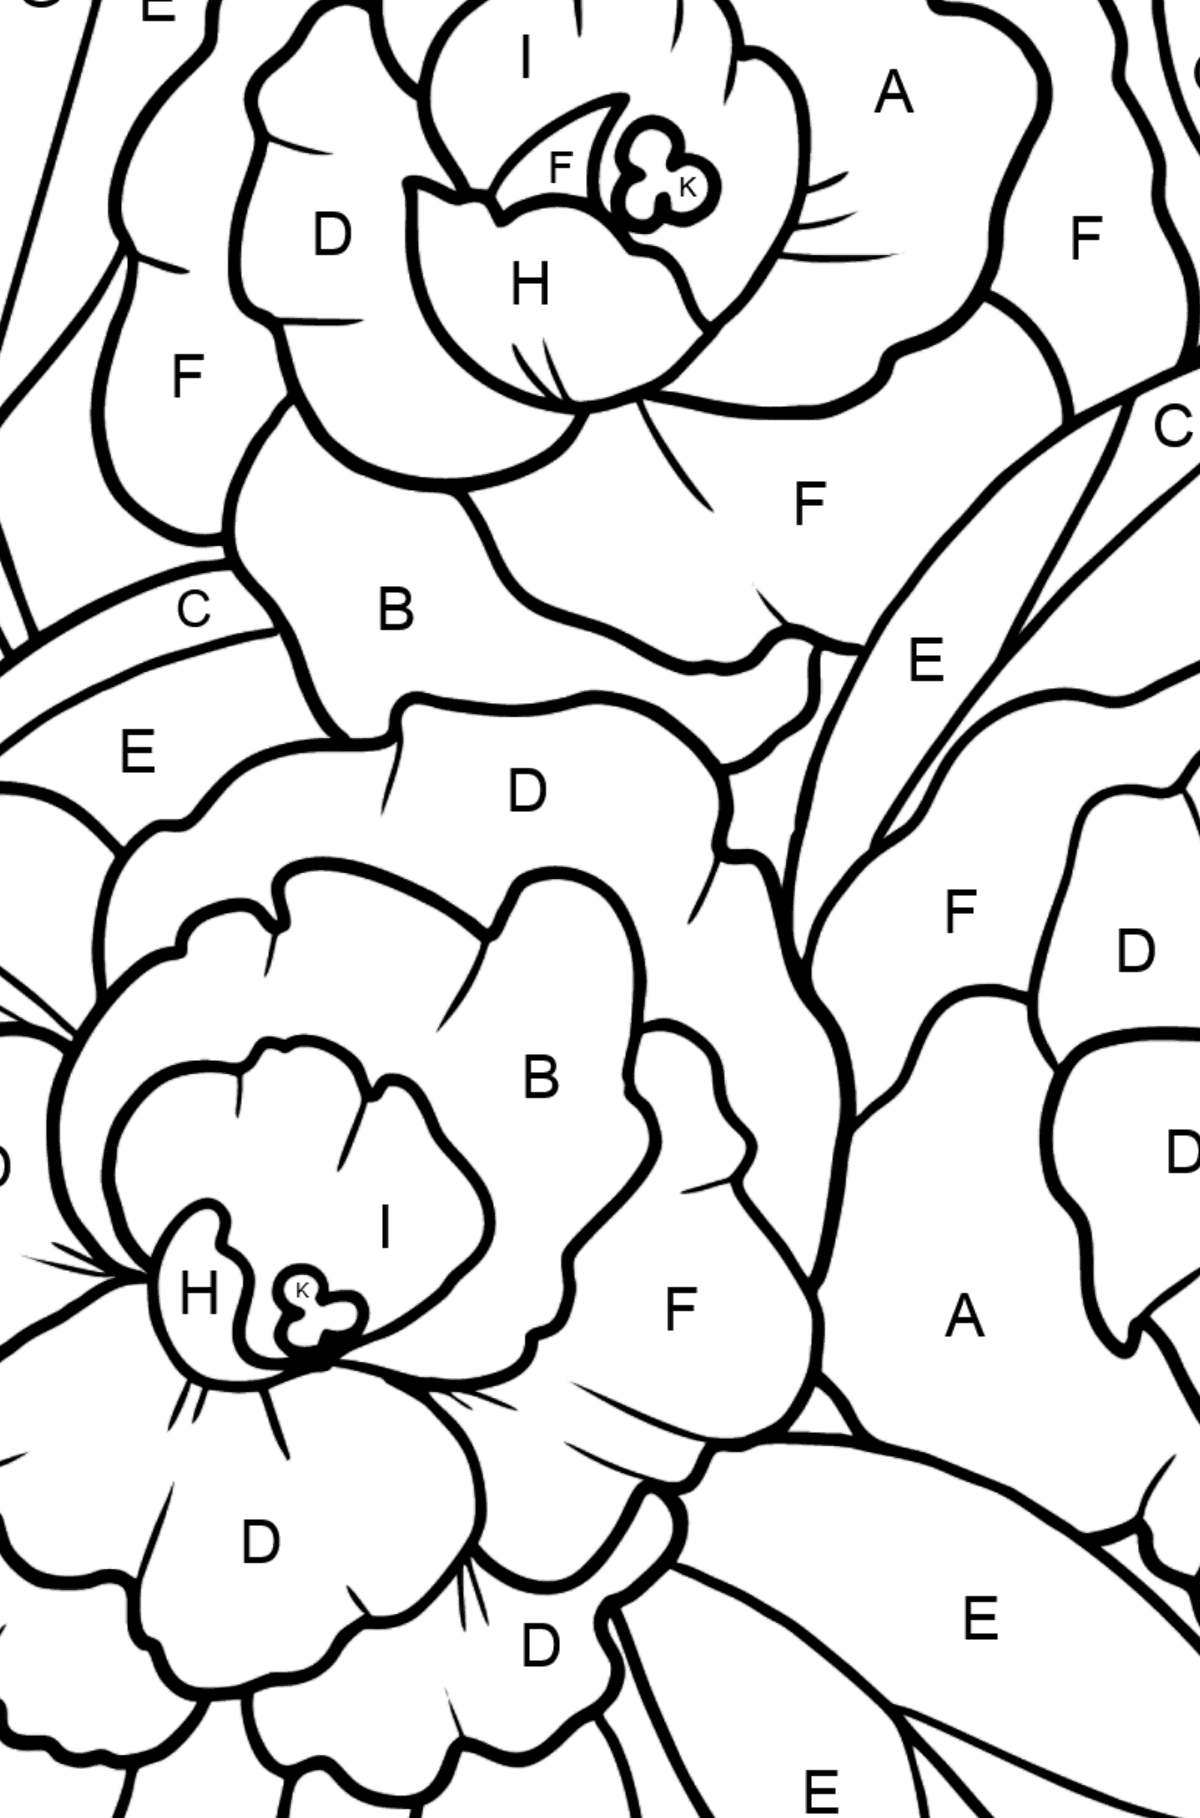 Flower Coloring Page - A Peony Blossom - Coloring by Letters for Kids